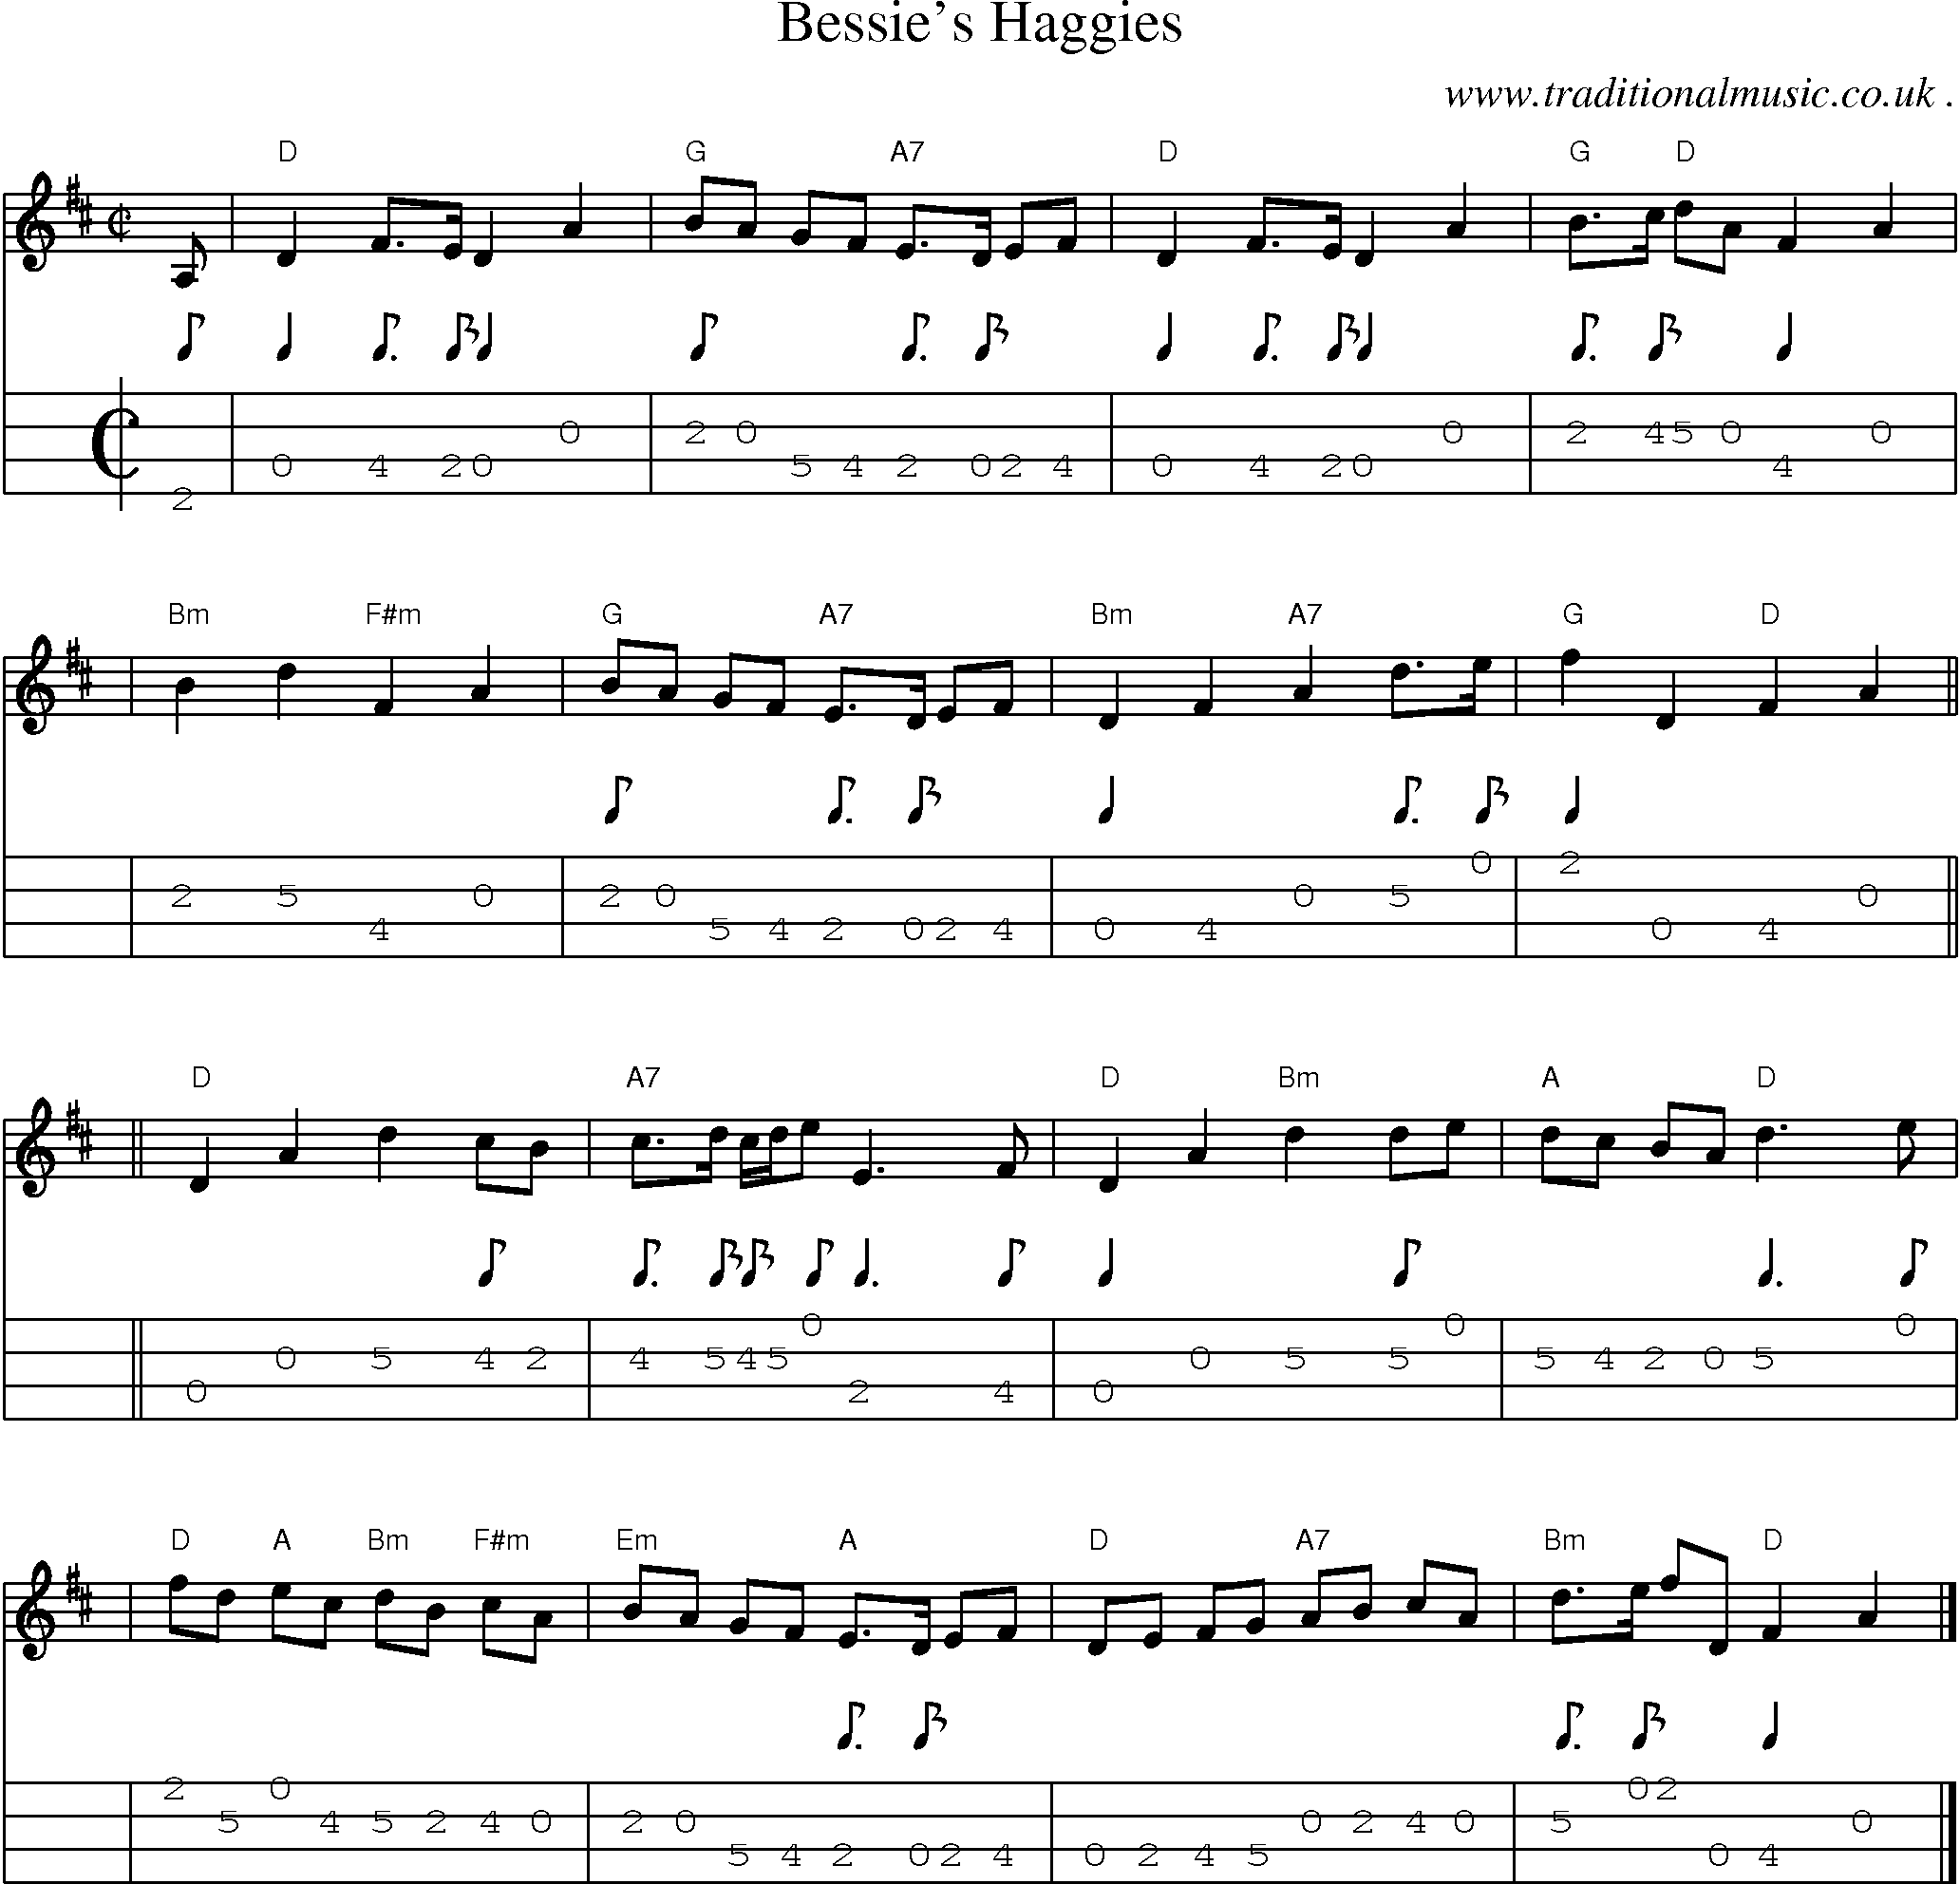 Sheet-music  score, Chords and Mandolin Tabs for Bessies Haggies